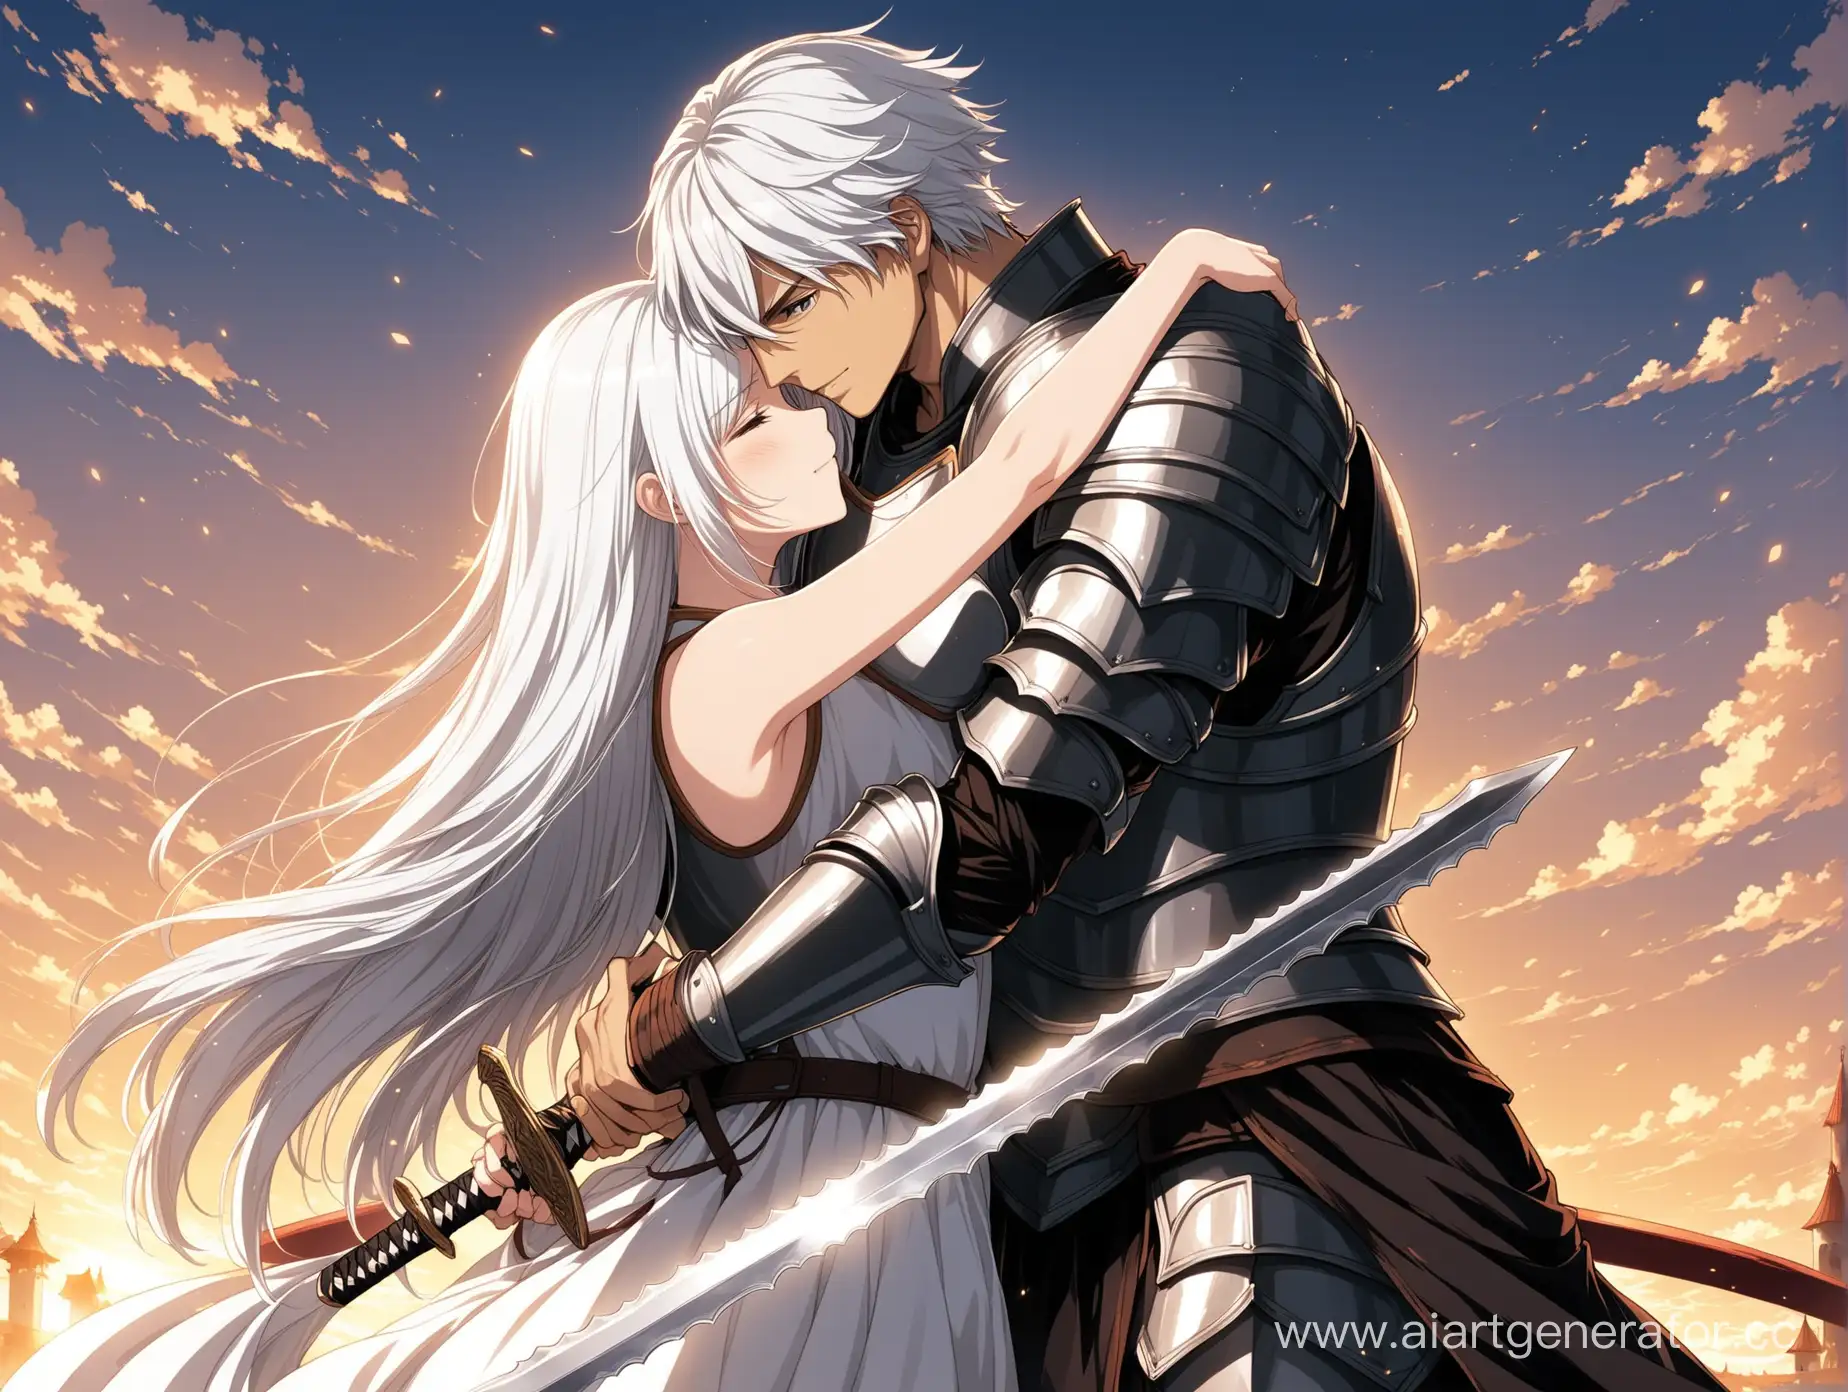 Fantasy-Anime-Scene-Girl-with-Black-and-White-Hair-Embracing-Armored-Guy-with-White-Hair-and-Swords